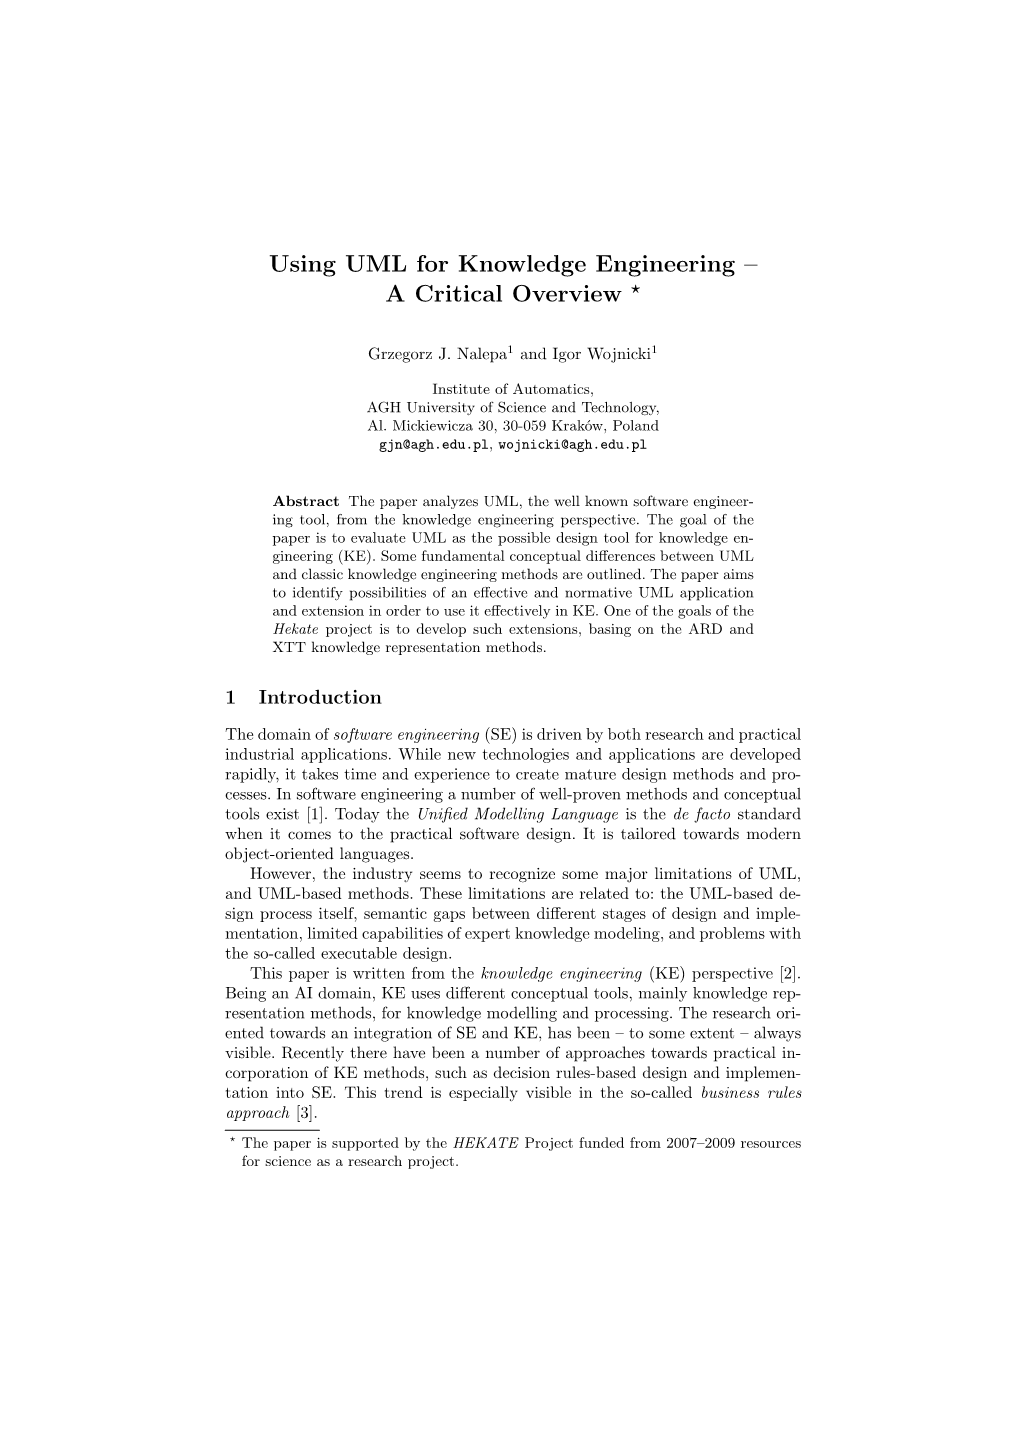 Using UML for Knowledge Engineering – a Critical Overview 